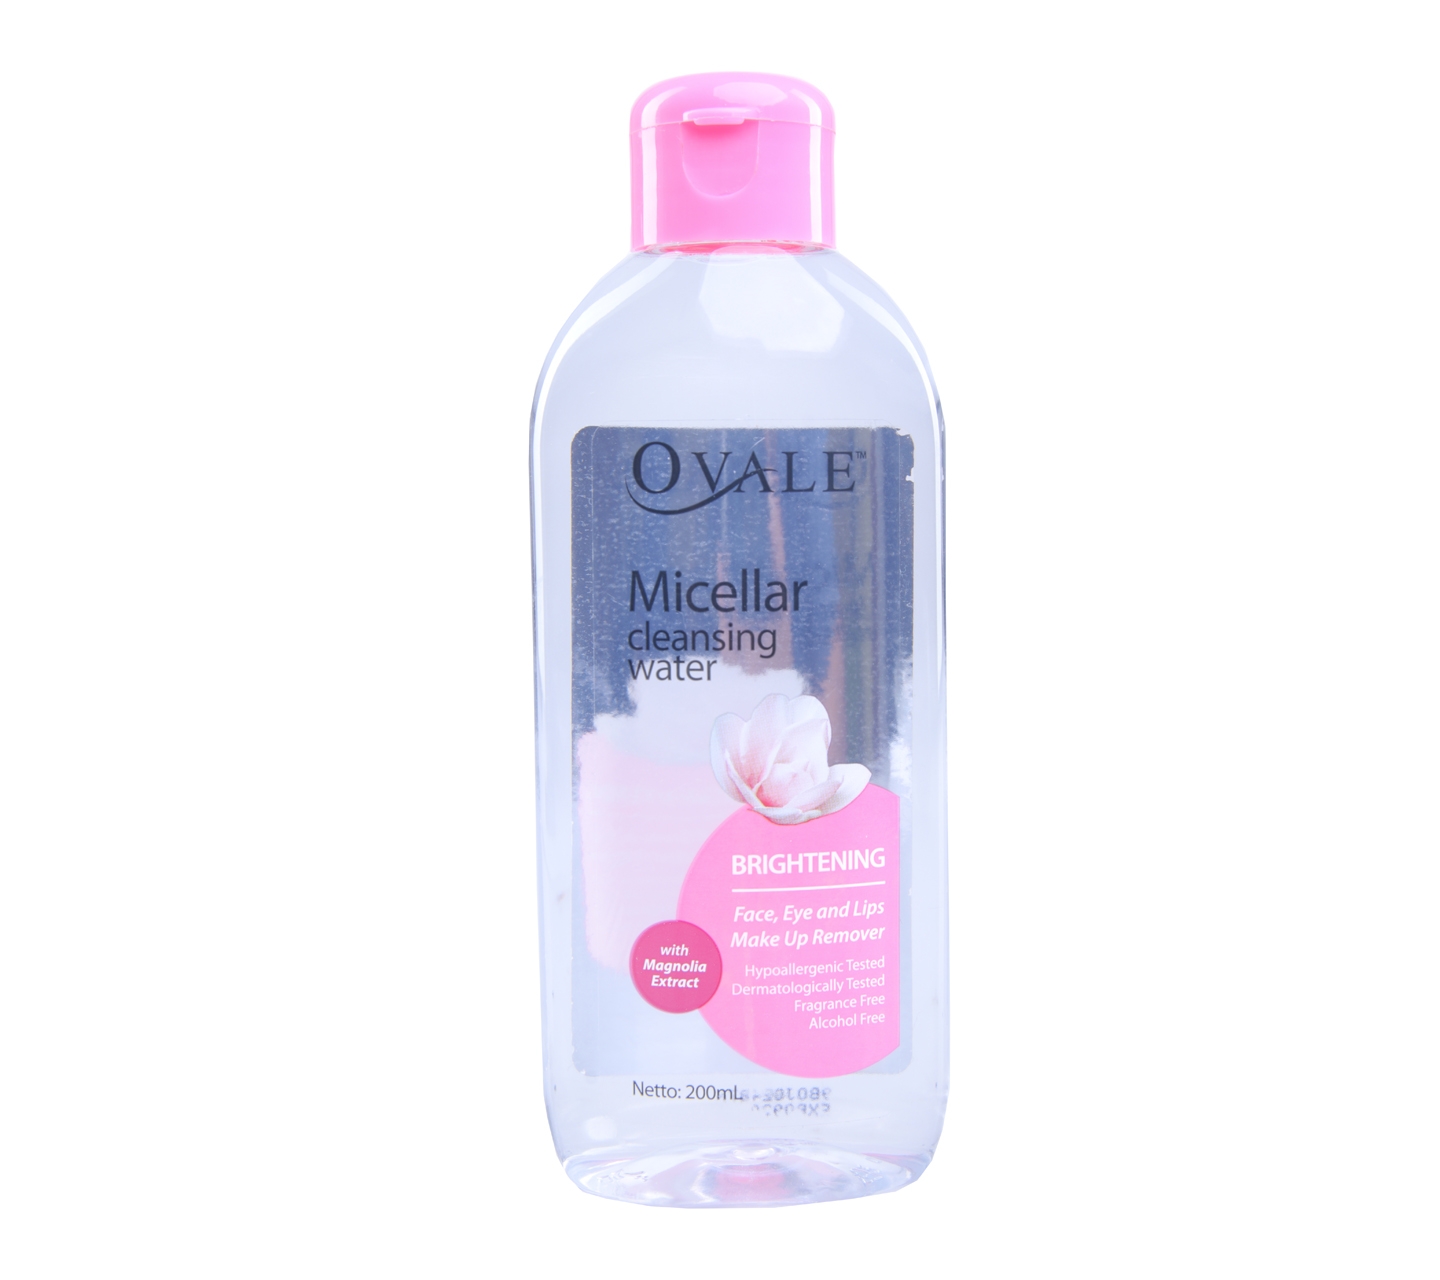 Ovale Micellar Cleansing Water Brightening Skin Care